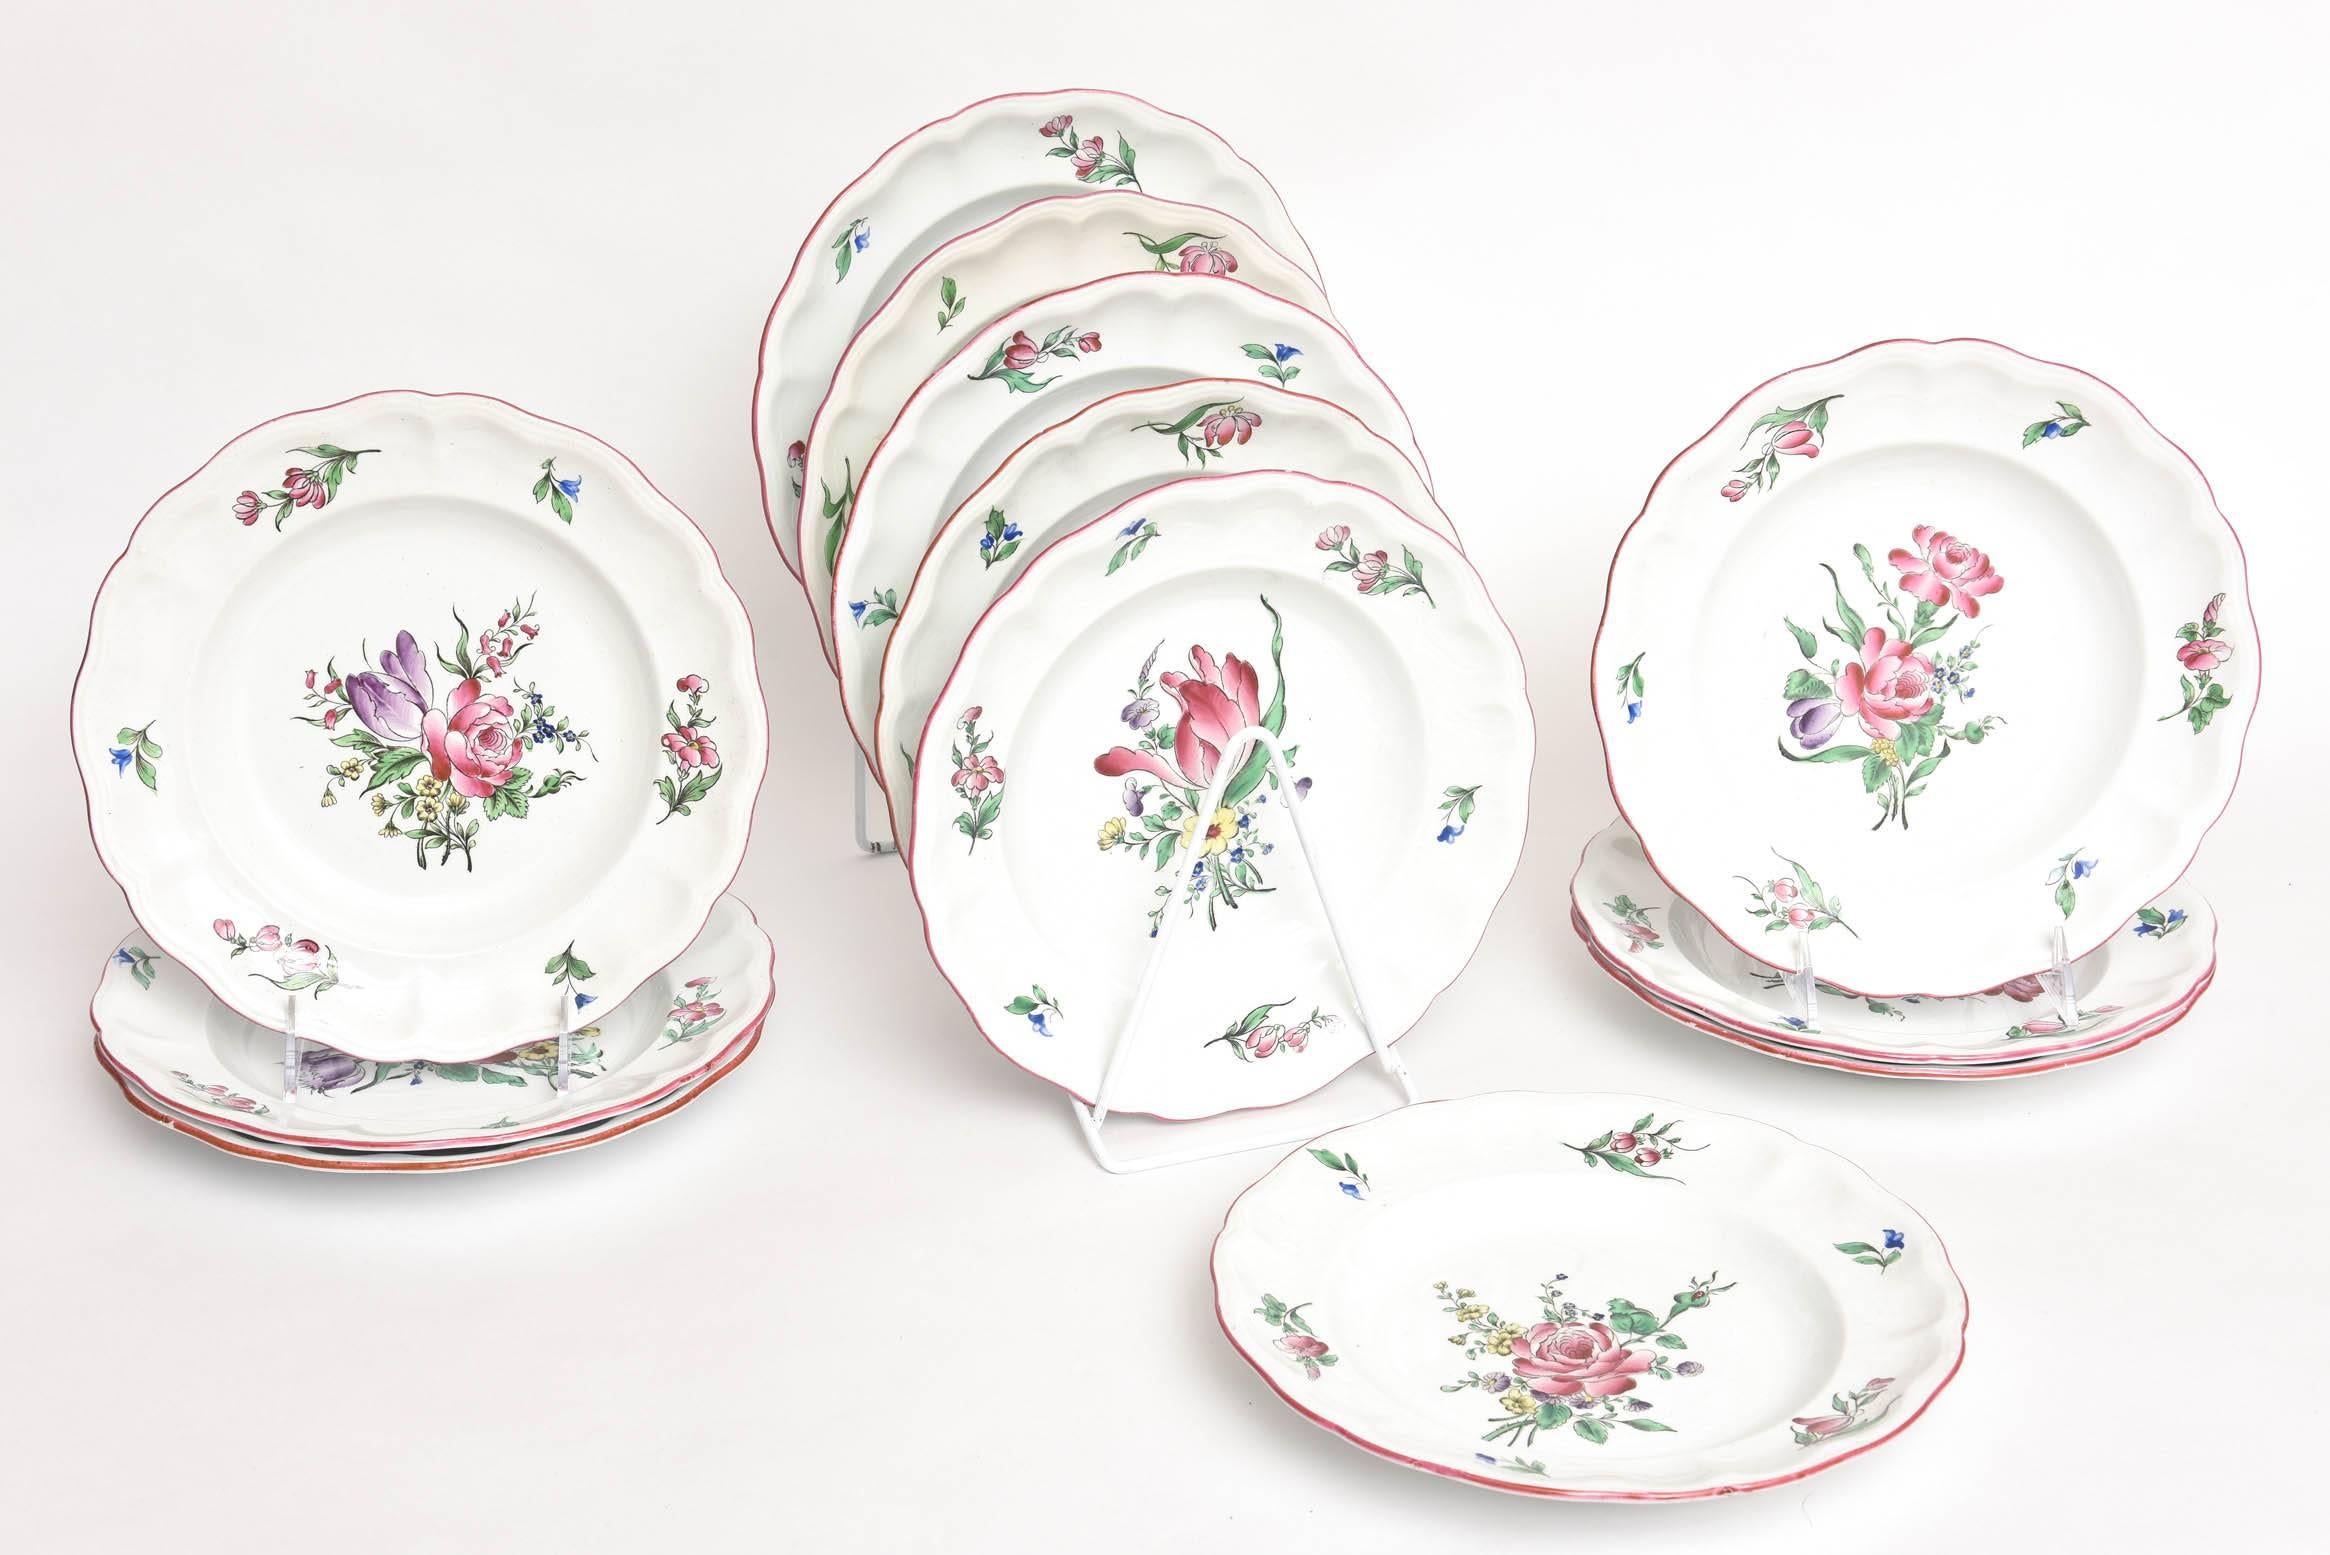 A delightful and charming set of 12 plates which feature different florals. While these plates are almost a hundred years old, this pattern has been made in many different combinations and still continues to be made. Timeless and so fresh and